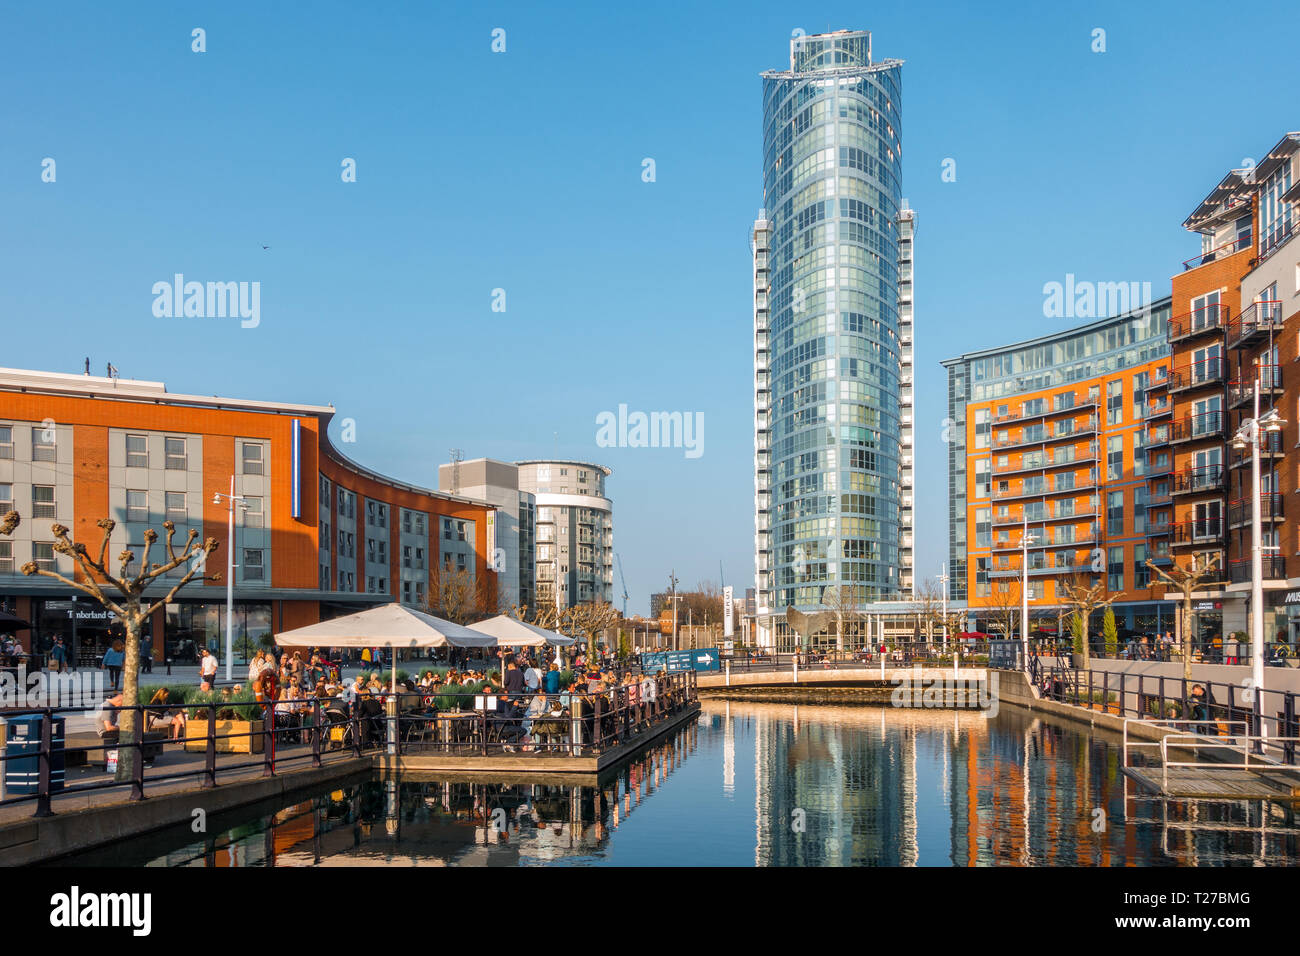 The Lipstick Tower at Gunwharf Quays in Portsmouth seen on a sunny day with clear blue skies. Stock Photo